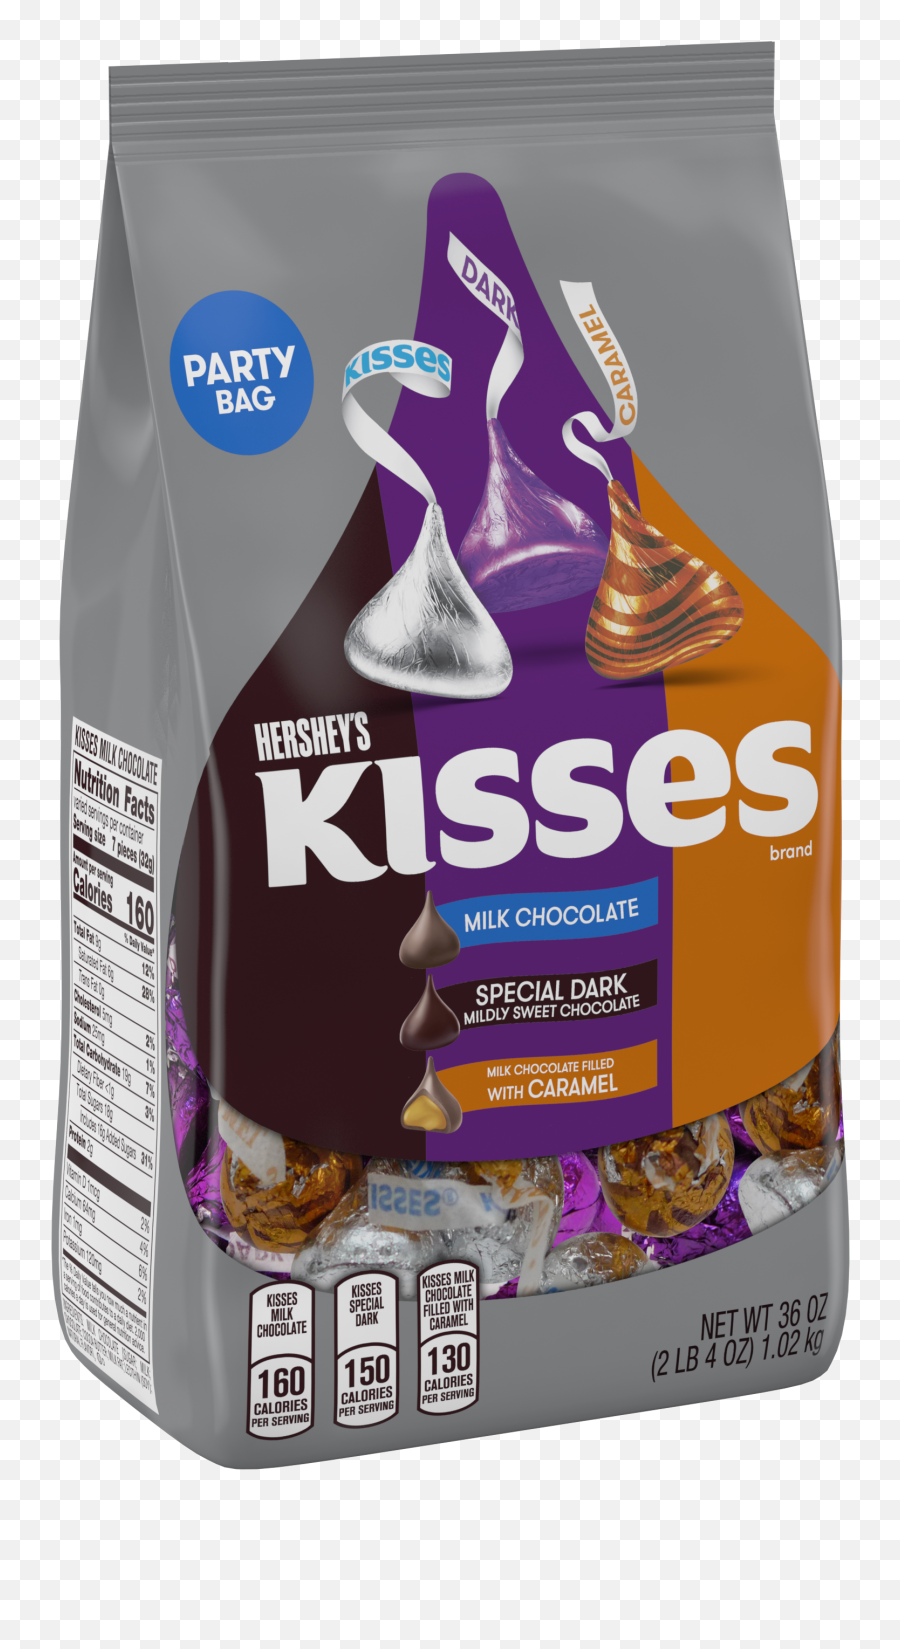 Download Hd Kisses Chocolate Candy Party Assortment 36 Oz Emoji,Hershey's Kisses Logo